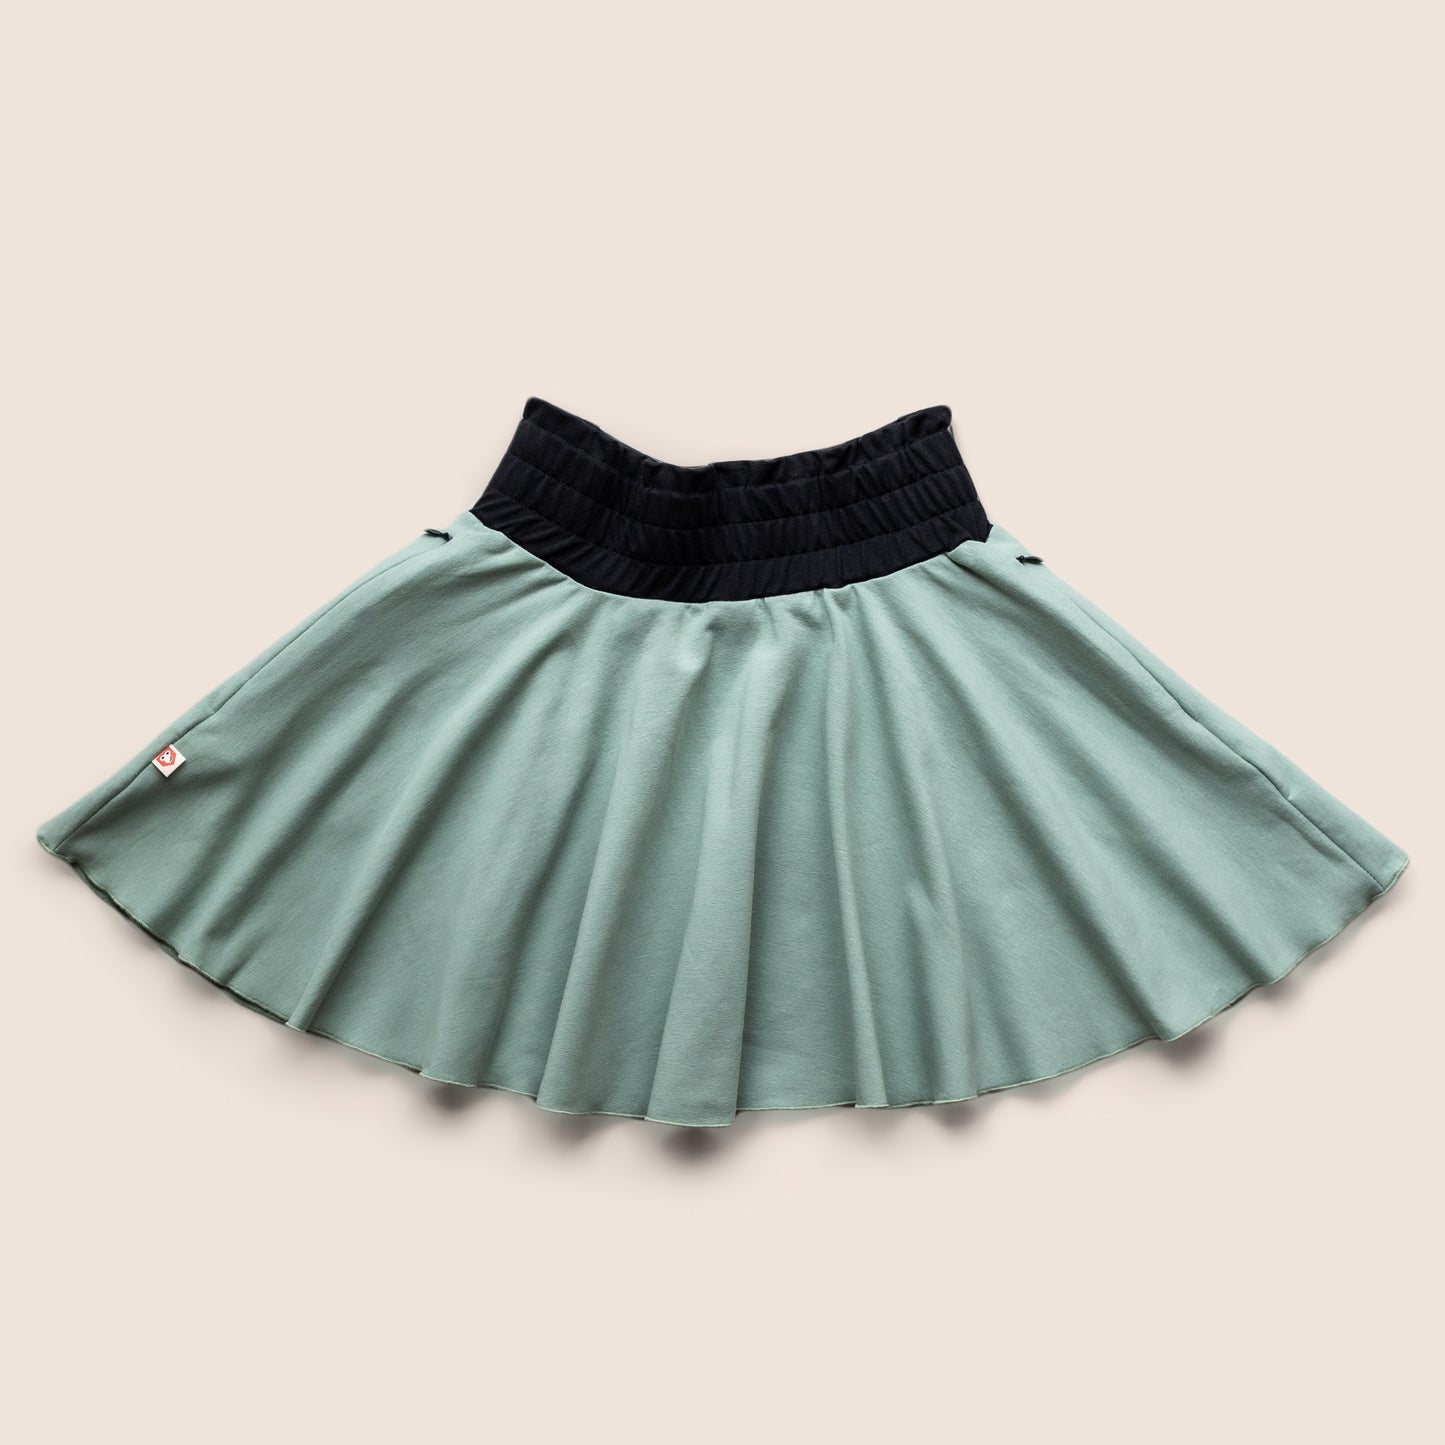 Type 1 Diabetes Clothing - Girls Skirt Mint Green with pockets | Our Pocket Hero